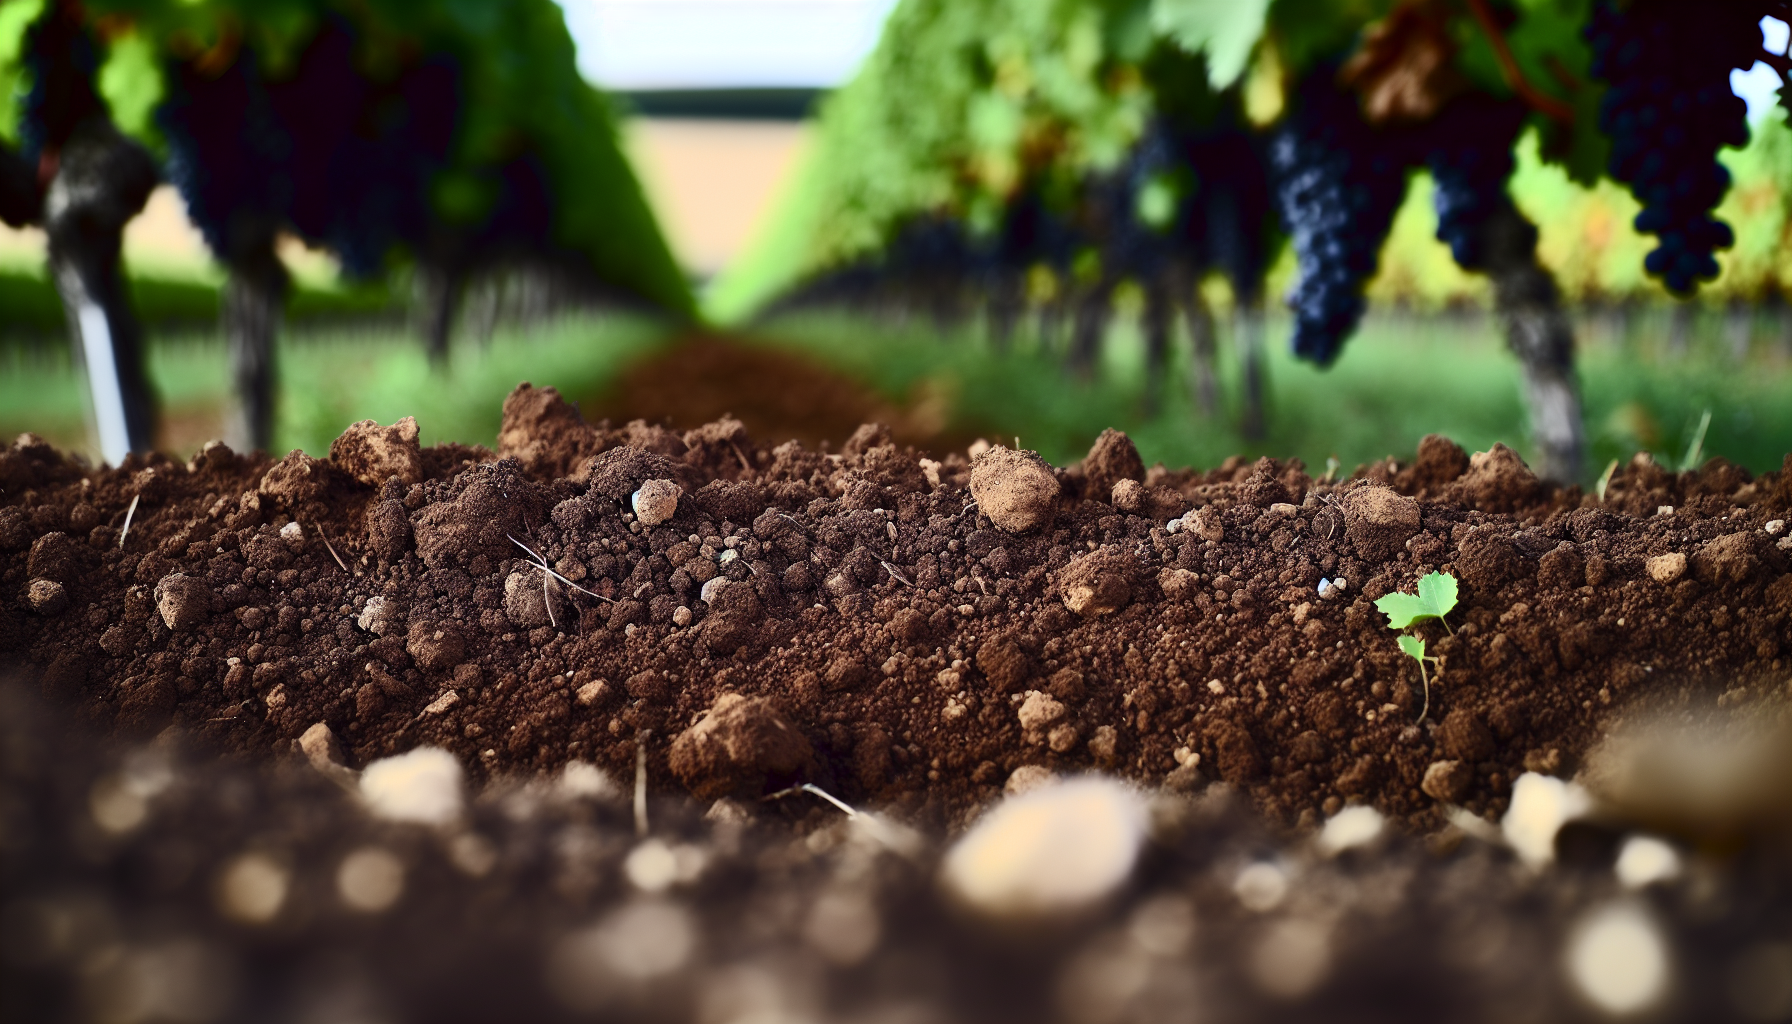 A close-up of soil with grapevines, highlighting the terroir concept